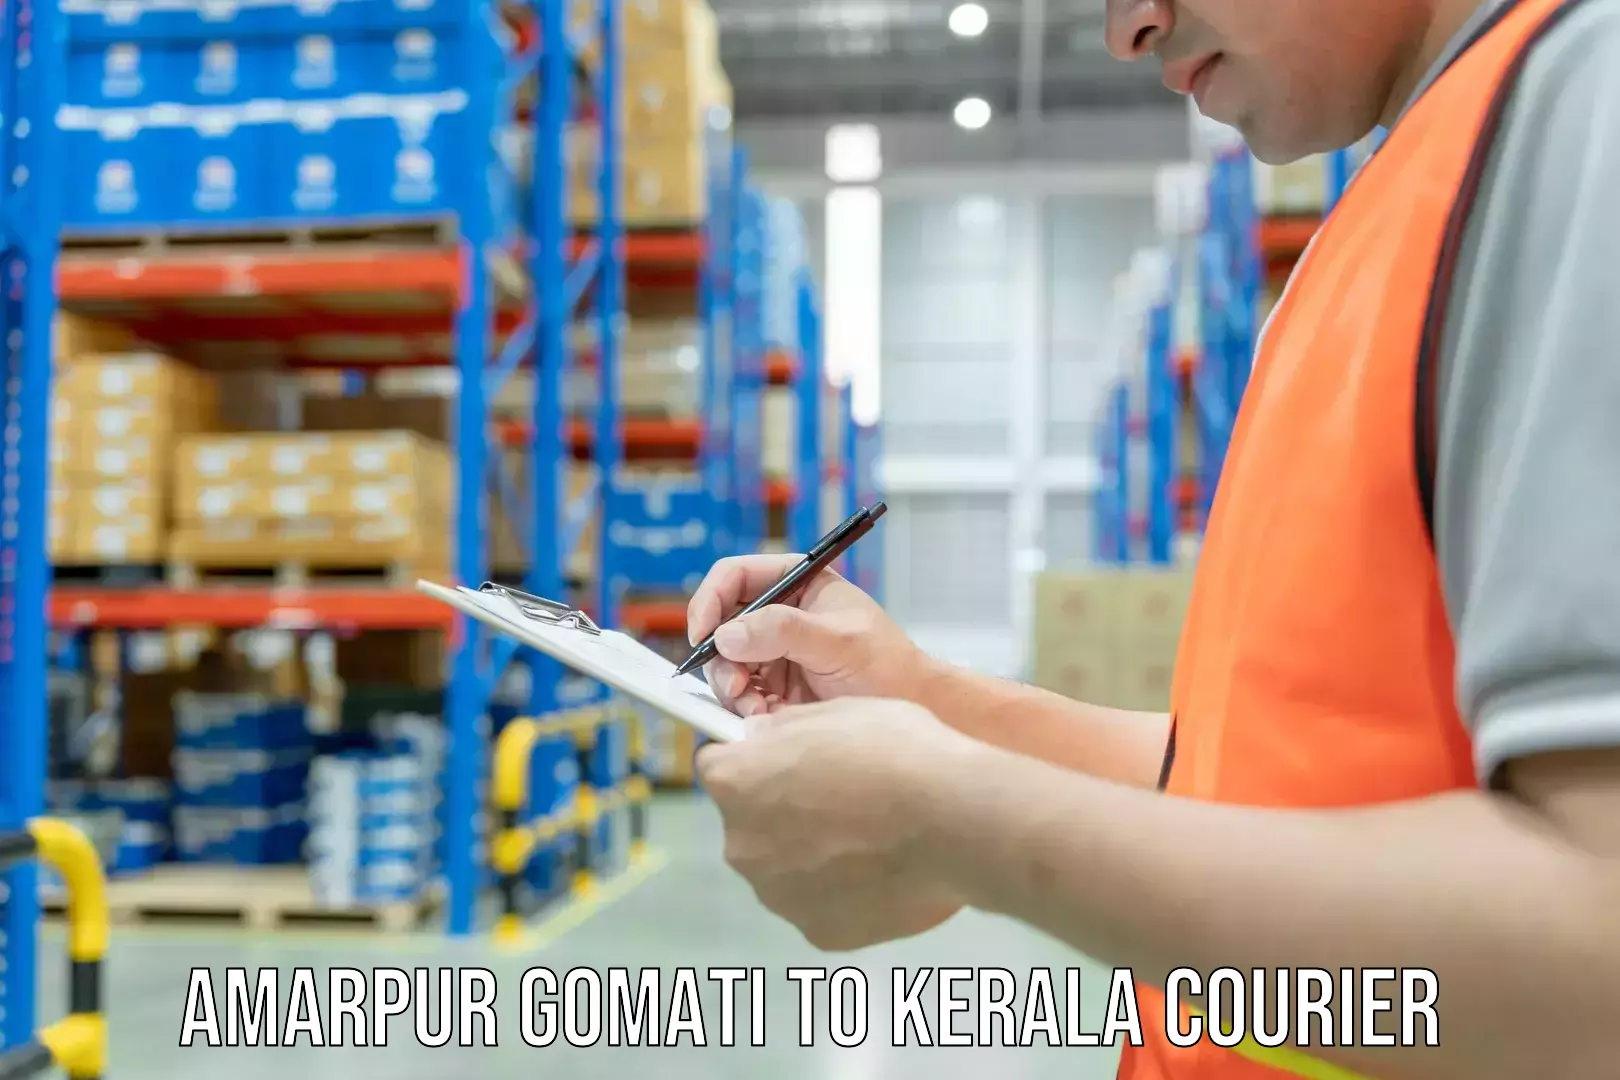 Parcel delivery automation Amarpur Gomati to Kerala